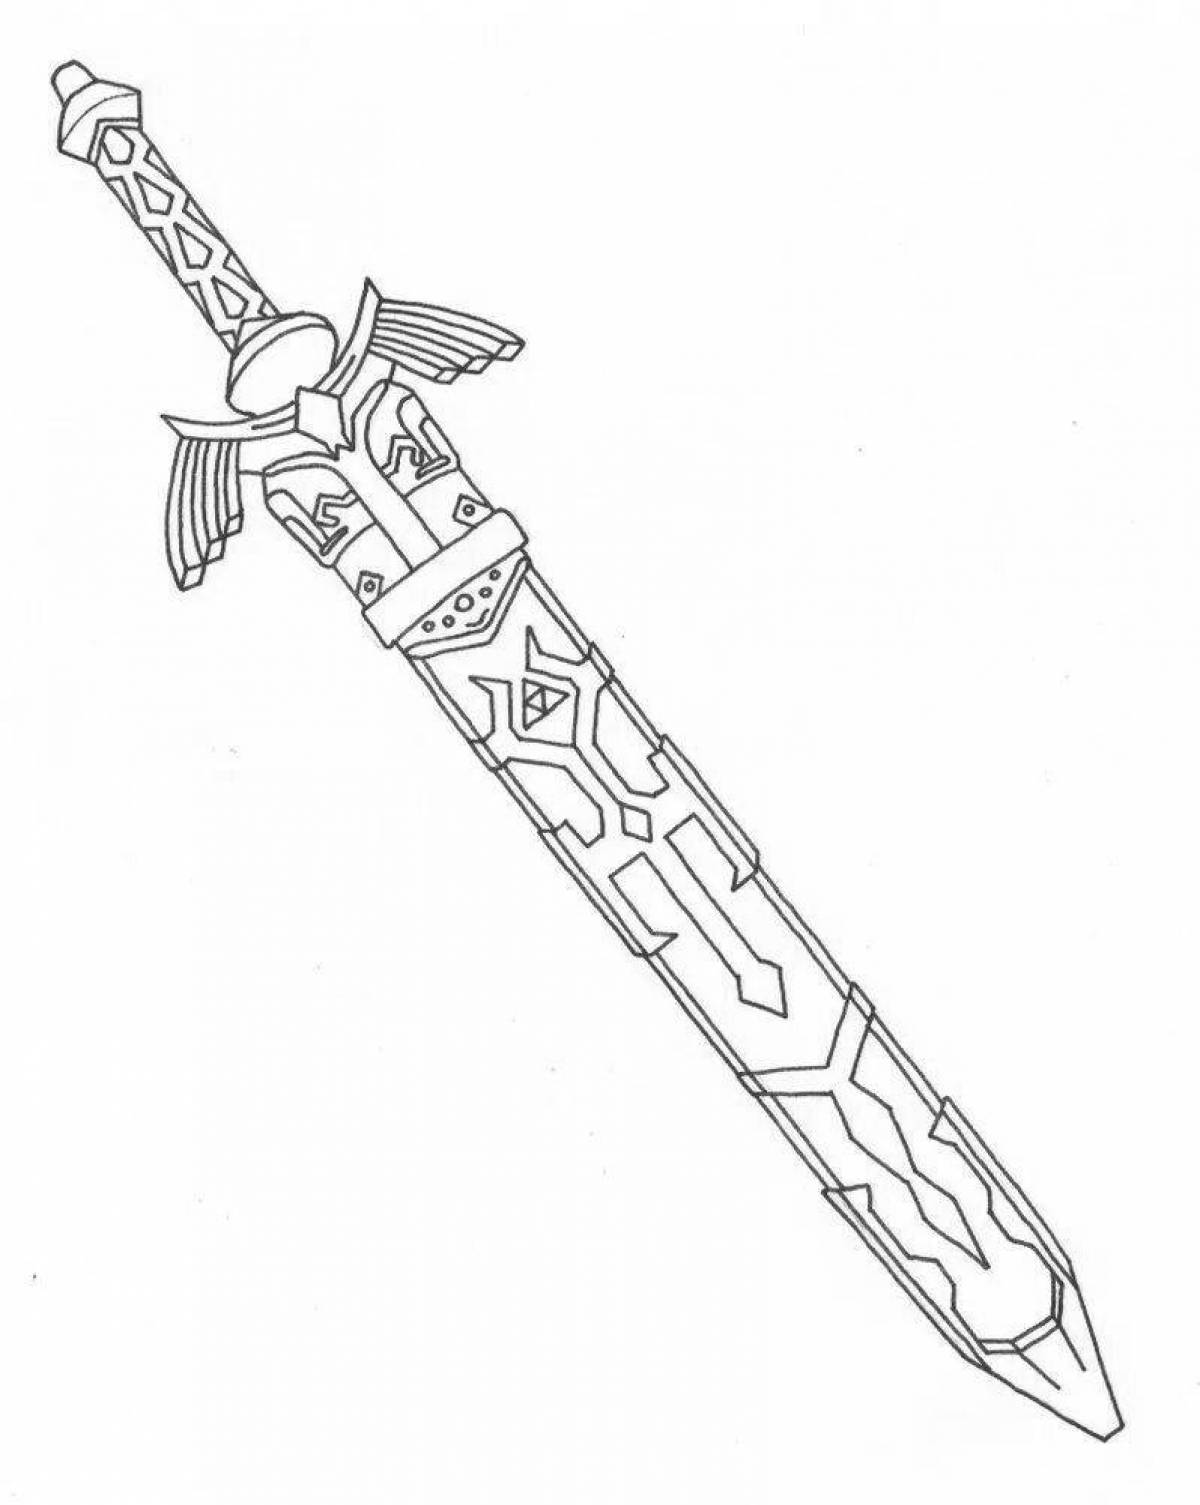 Sword coloring page for kids